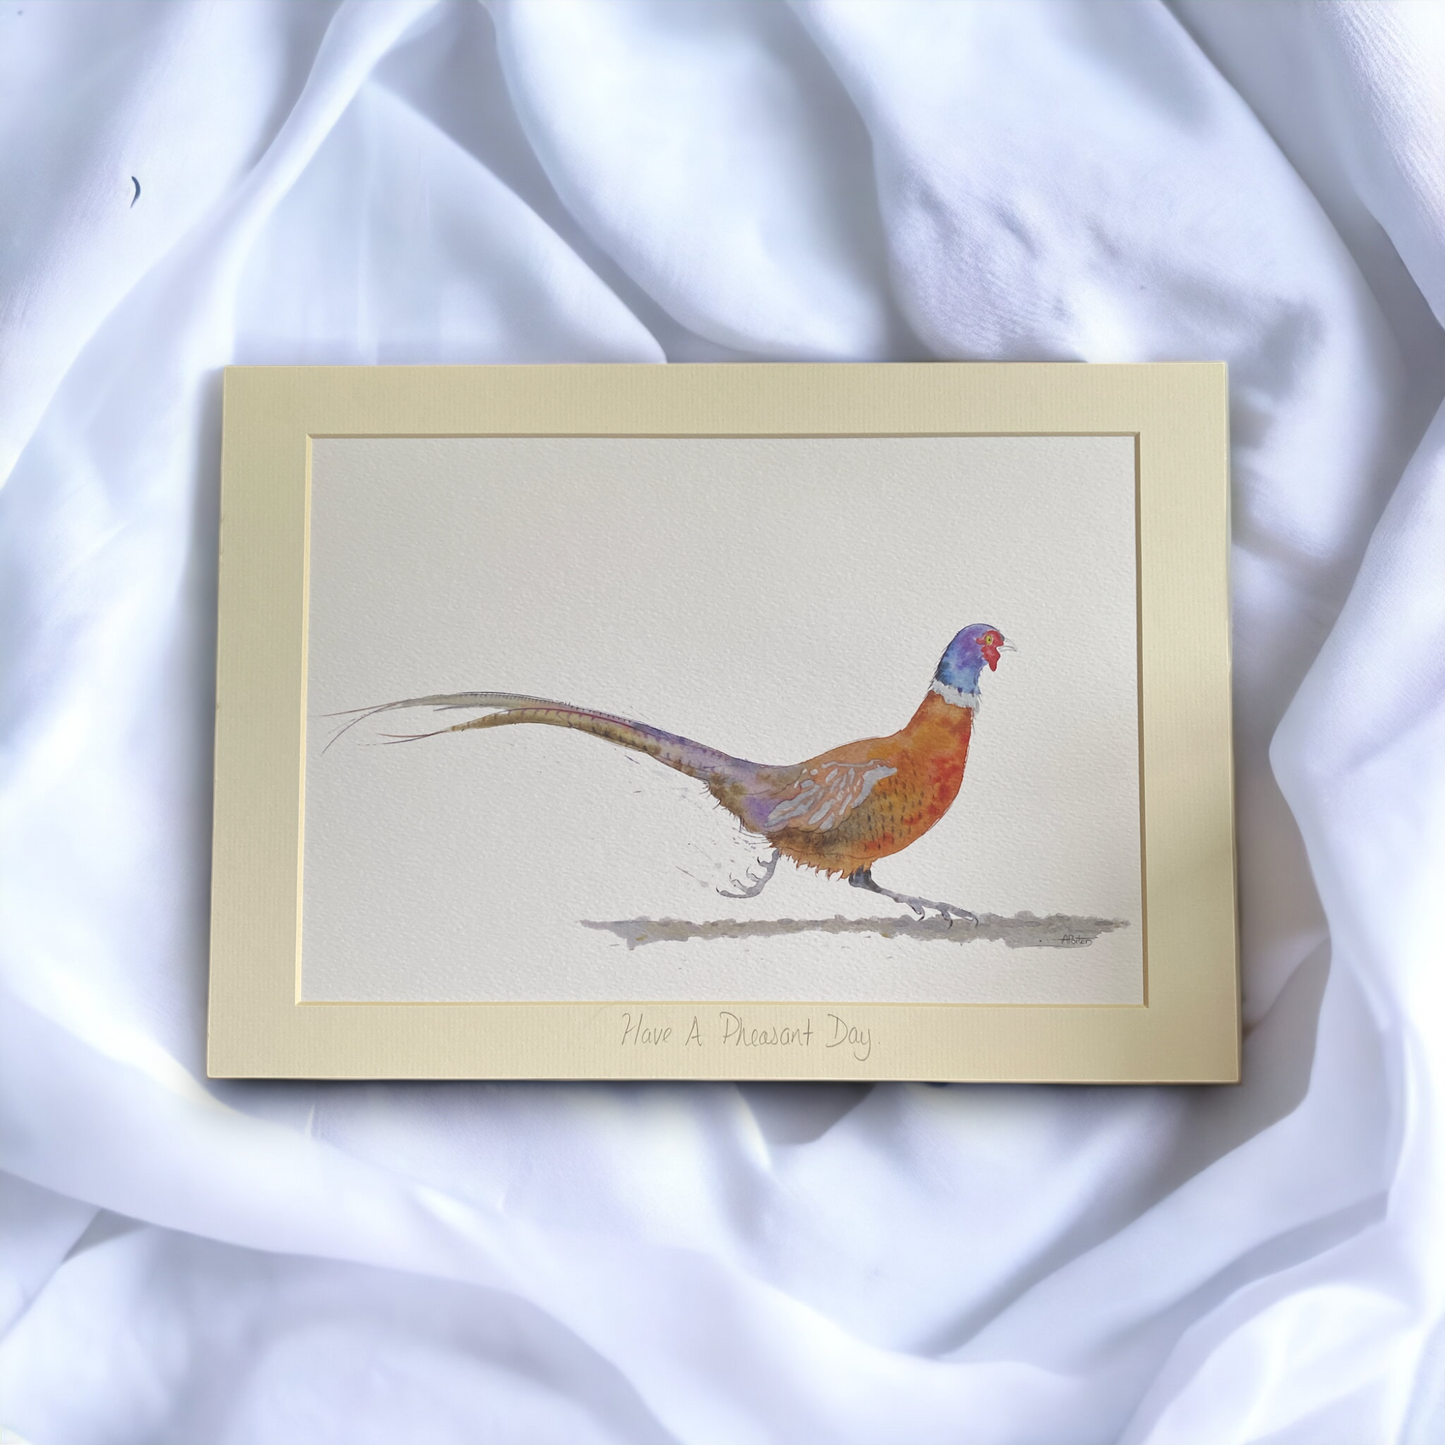 'Have a Pheasant Day' Limited Edition Artwork Print